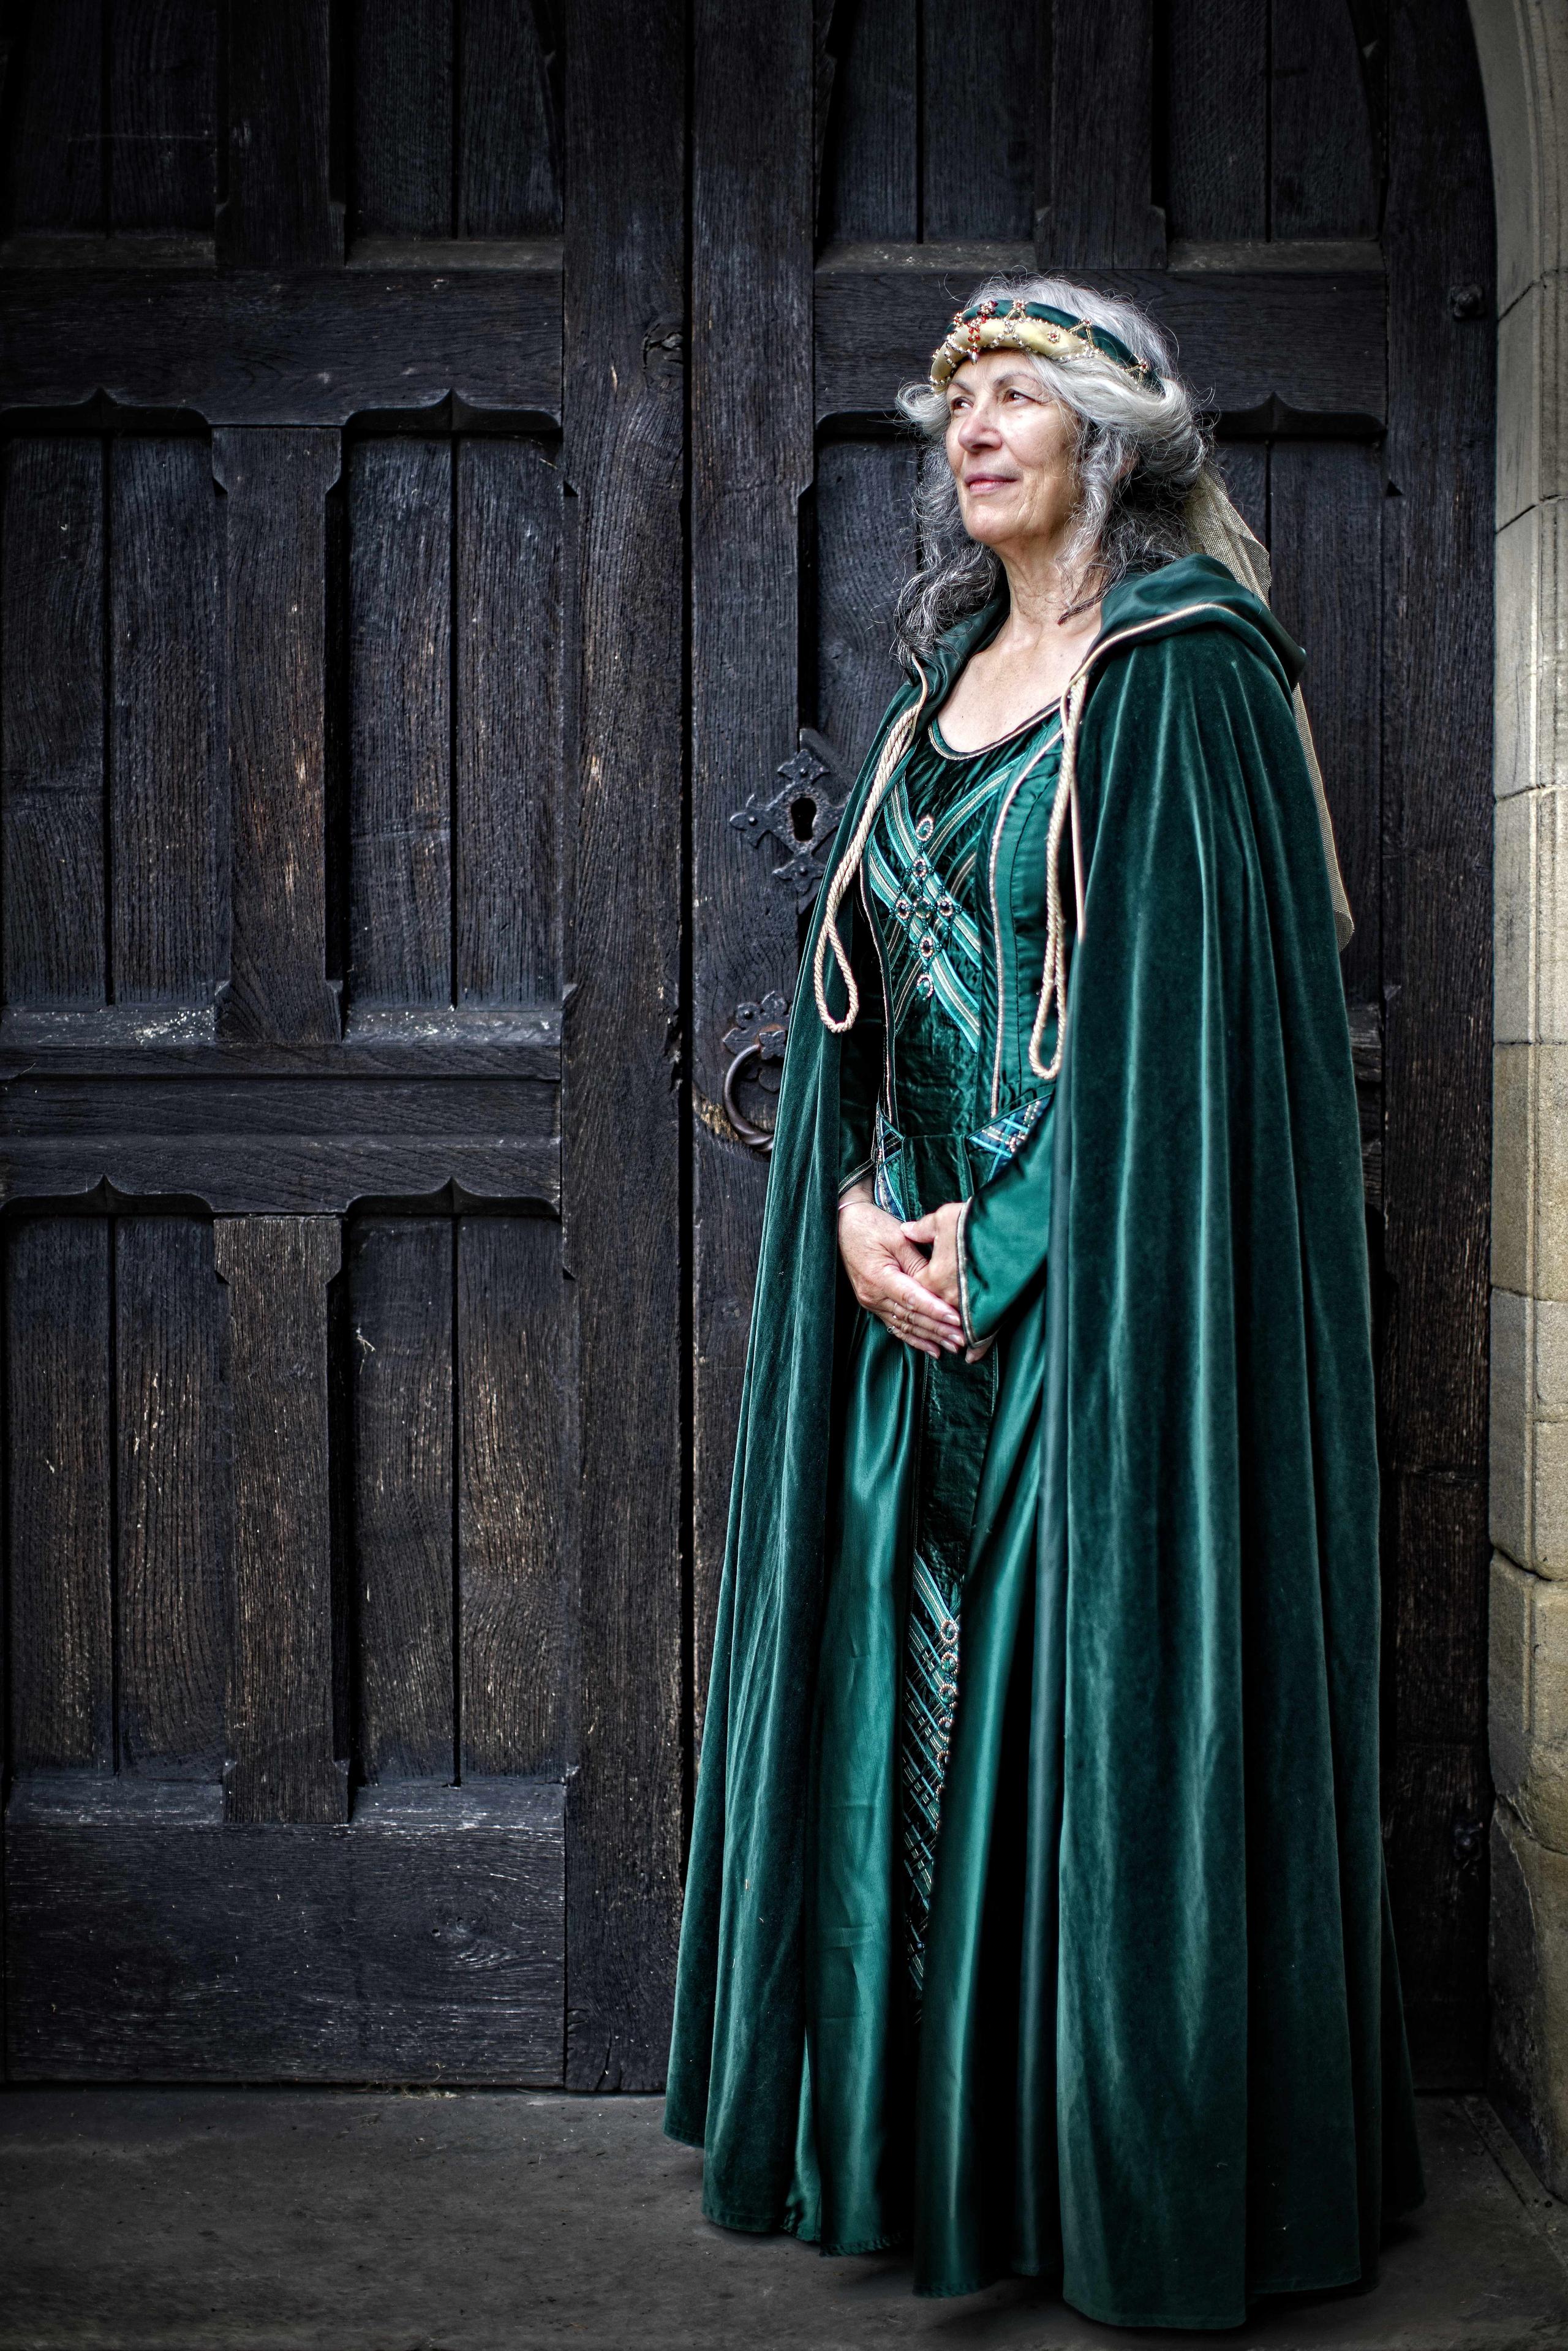 Castleton green. A ve neck medieval gown in green, petrol blue and gold.